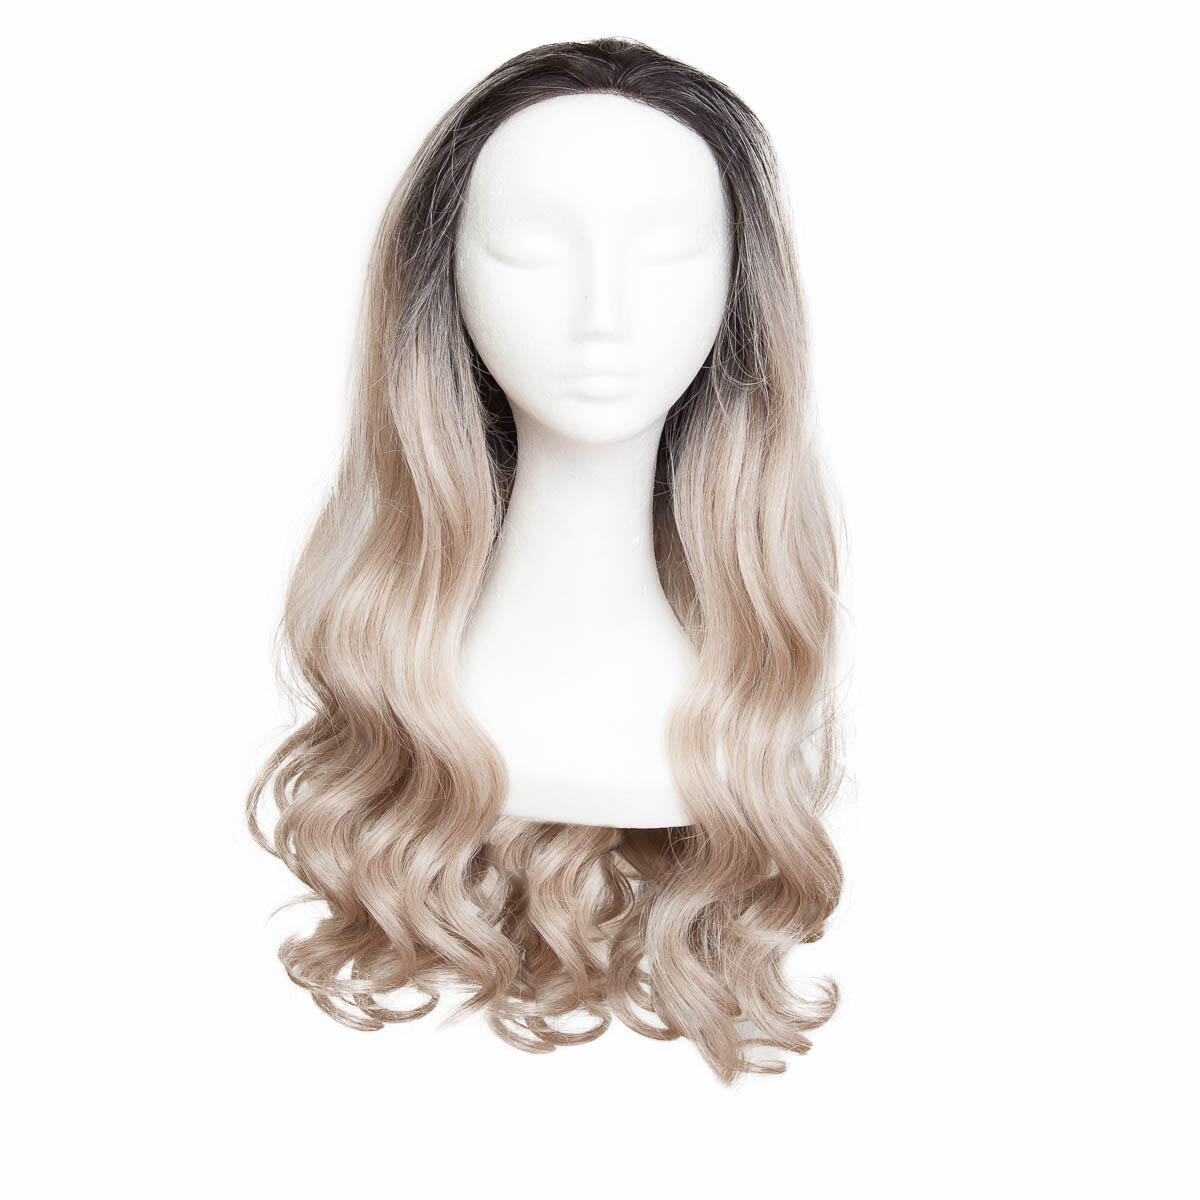 Lace Front Wig Long Curly O1.2/10.5 Black Brown/Grey 60 cm